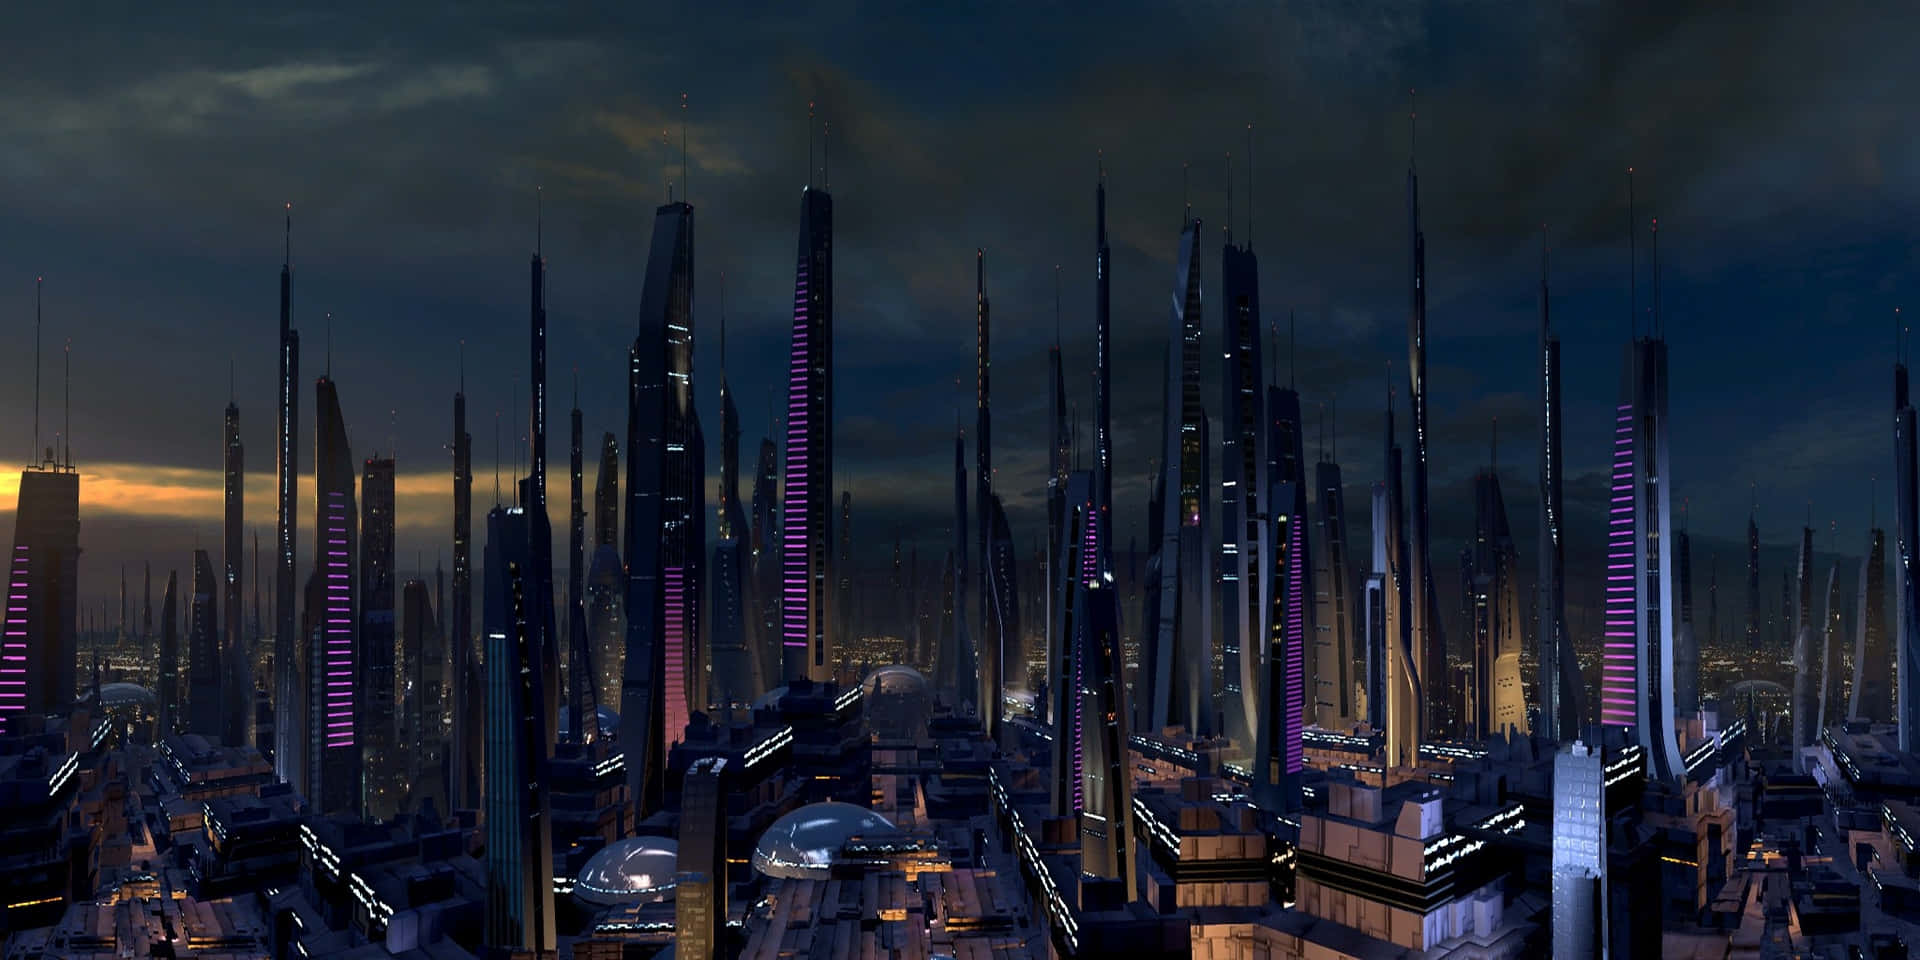 Spectacular view of the Citadel from Mass Effect Wallpaper